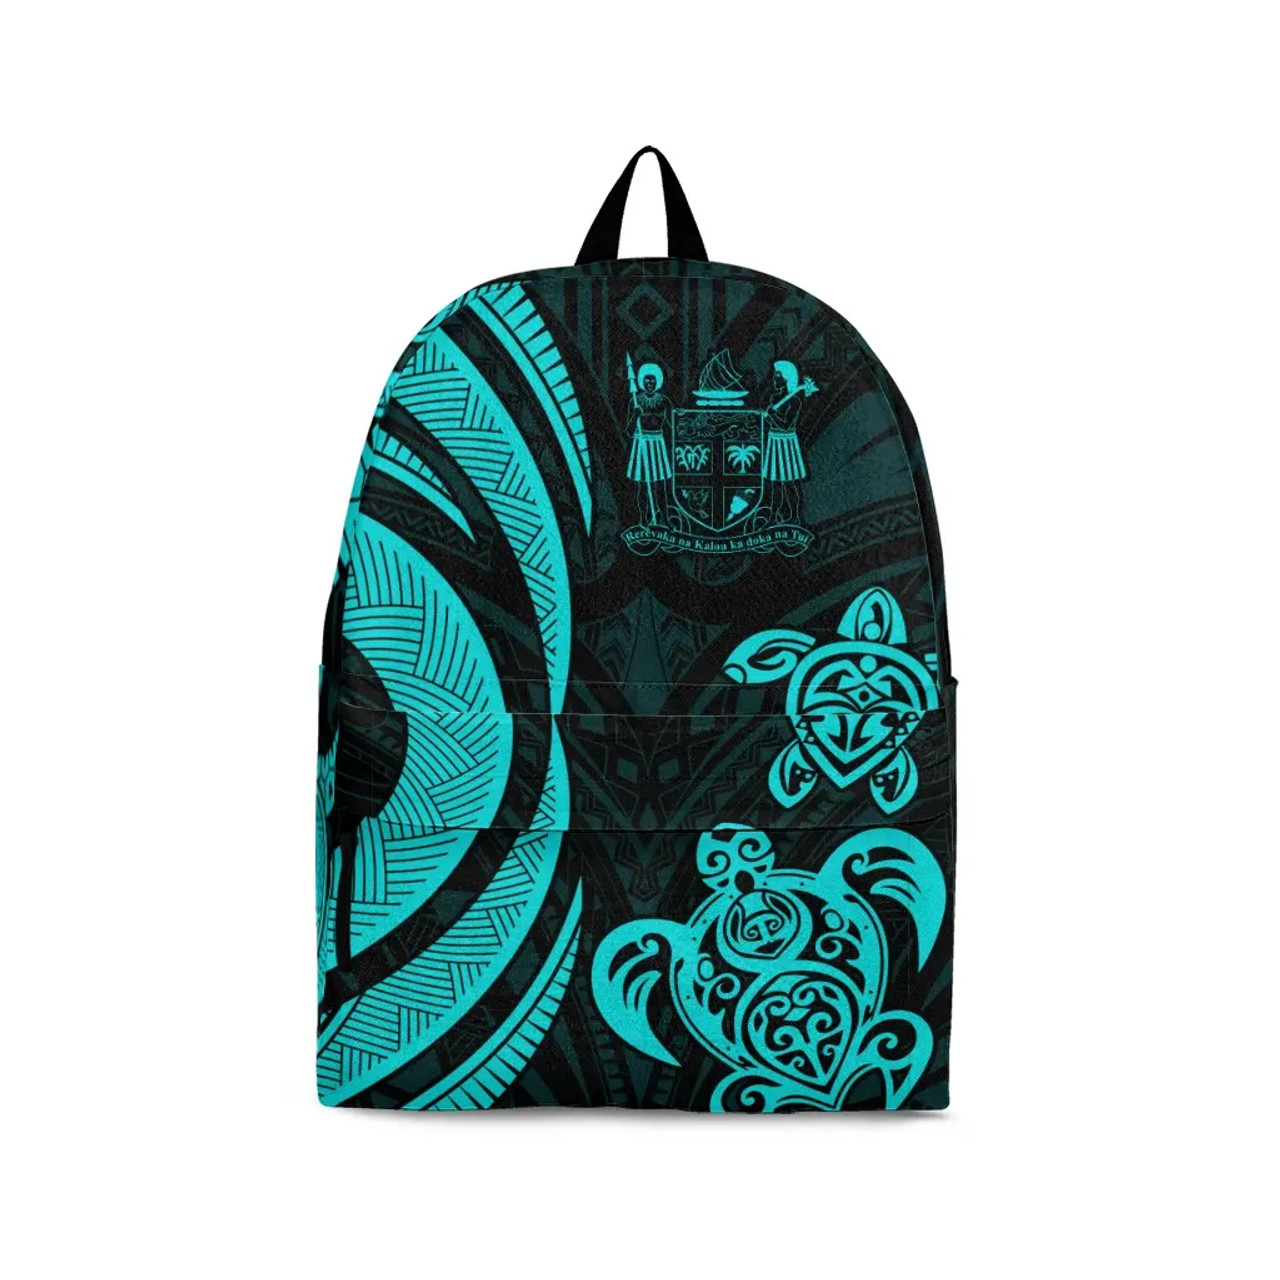 Fiji Backpack - Turquoise Tentacle Turtle Crest 1